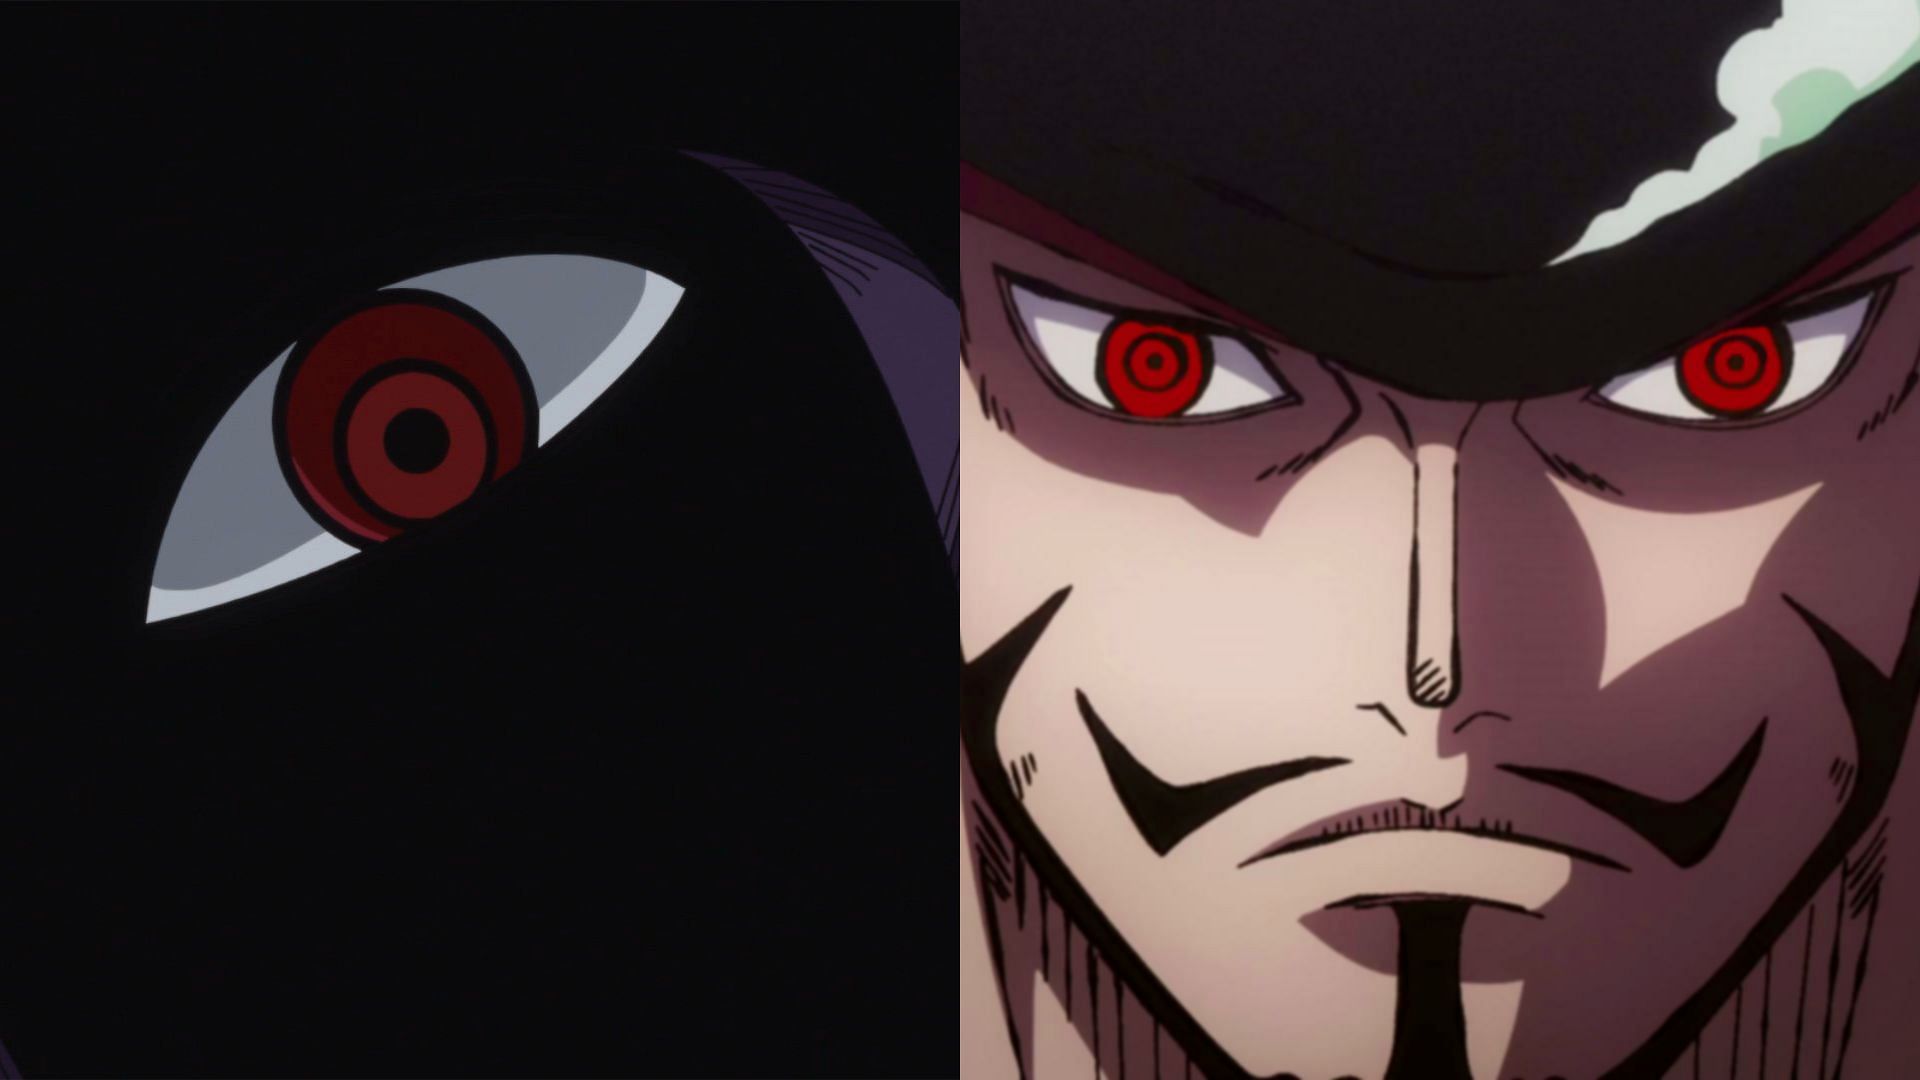 The red ringed eyes are only one of the many mysteries about Imu (Image via Toei Animation, One Piece)